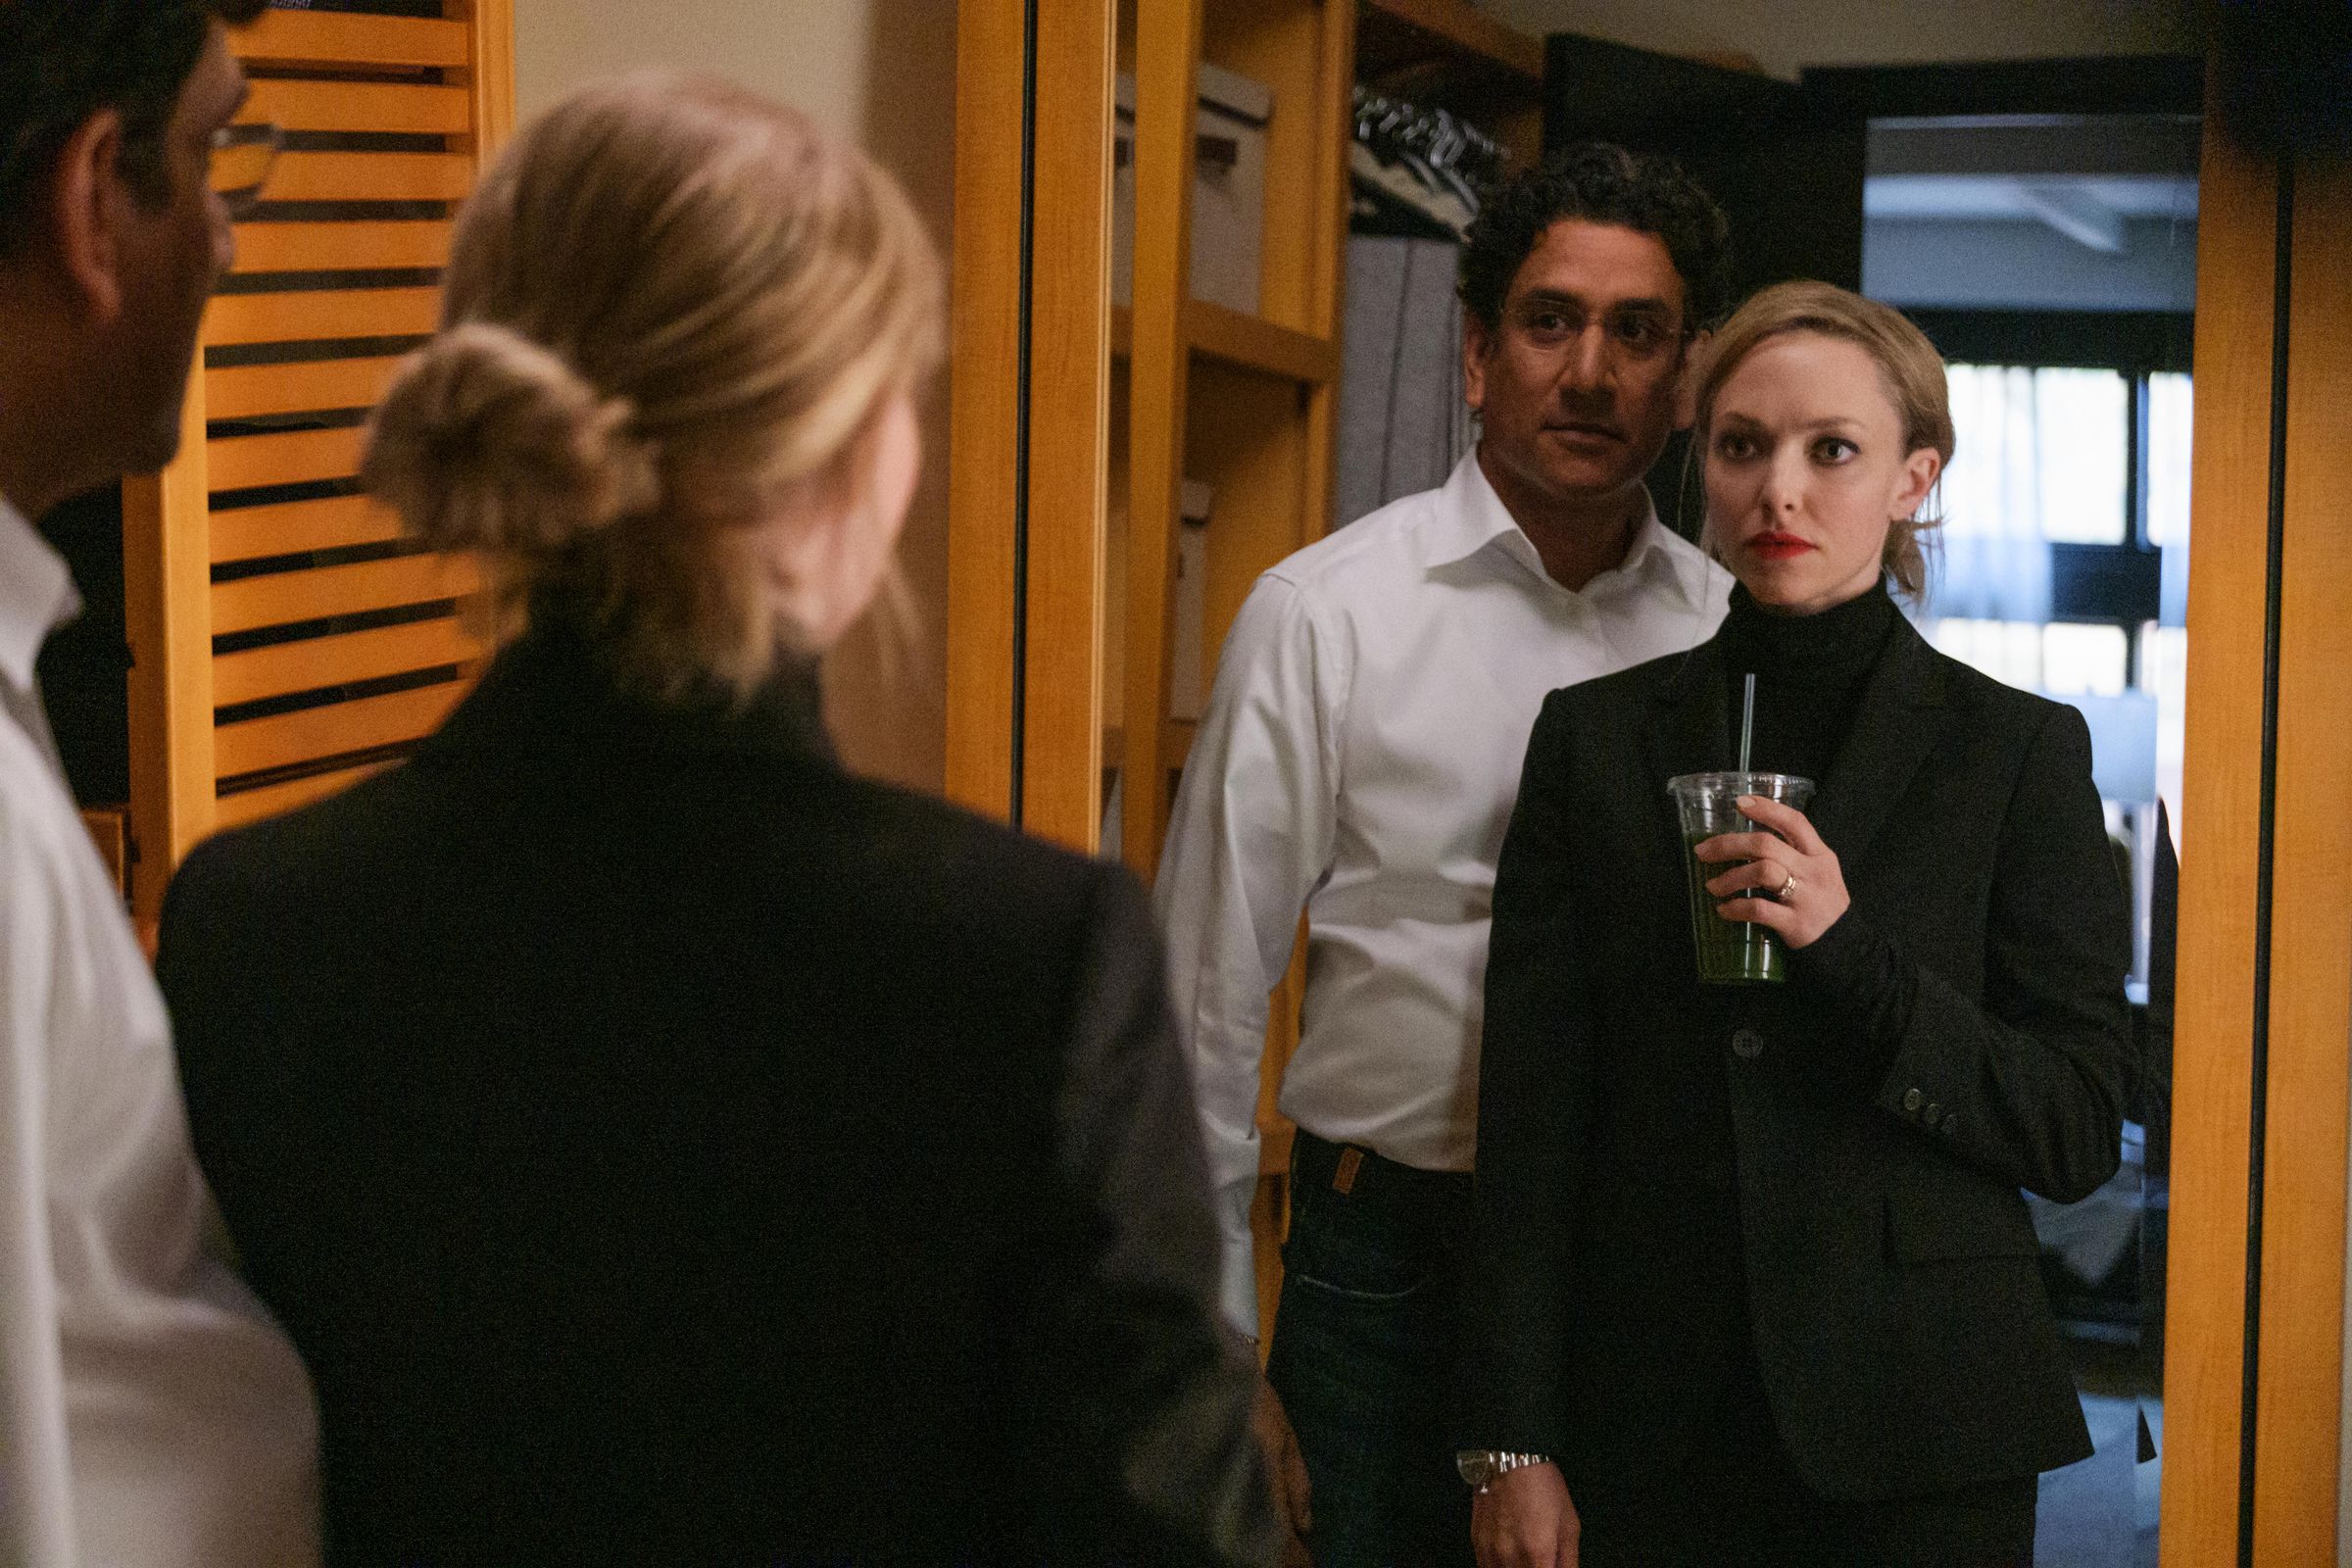 Sunny Balwani and Elizabeth Holmes staring at their reflections in a mirror together.